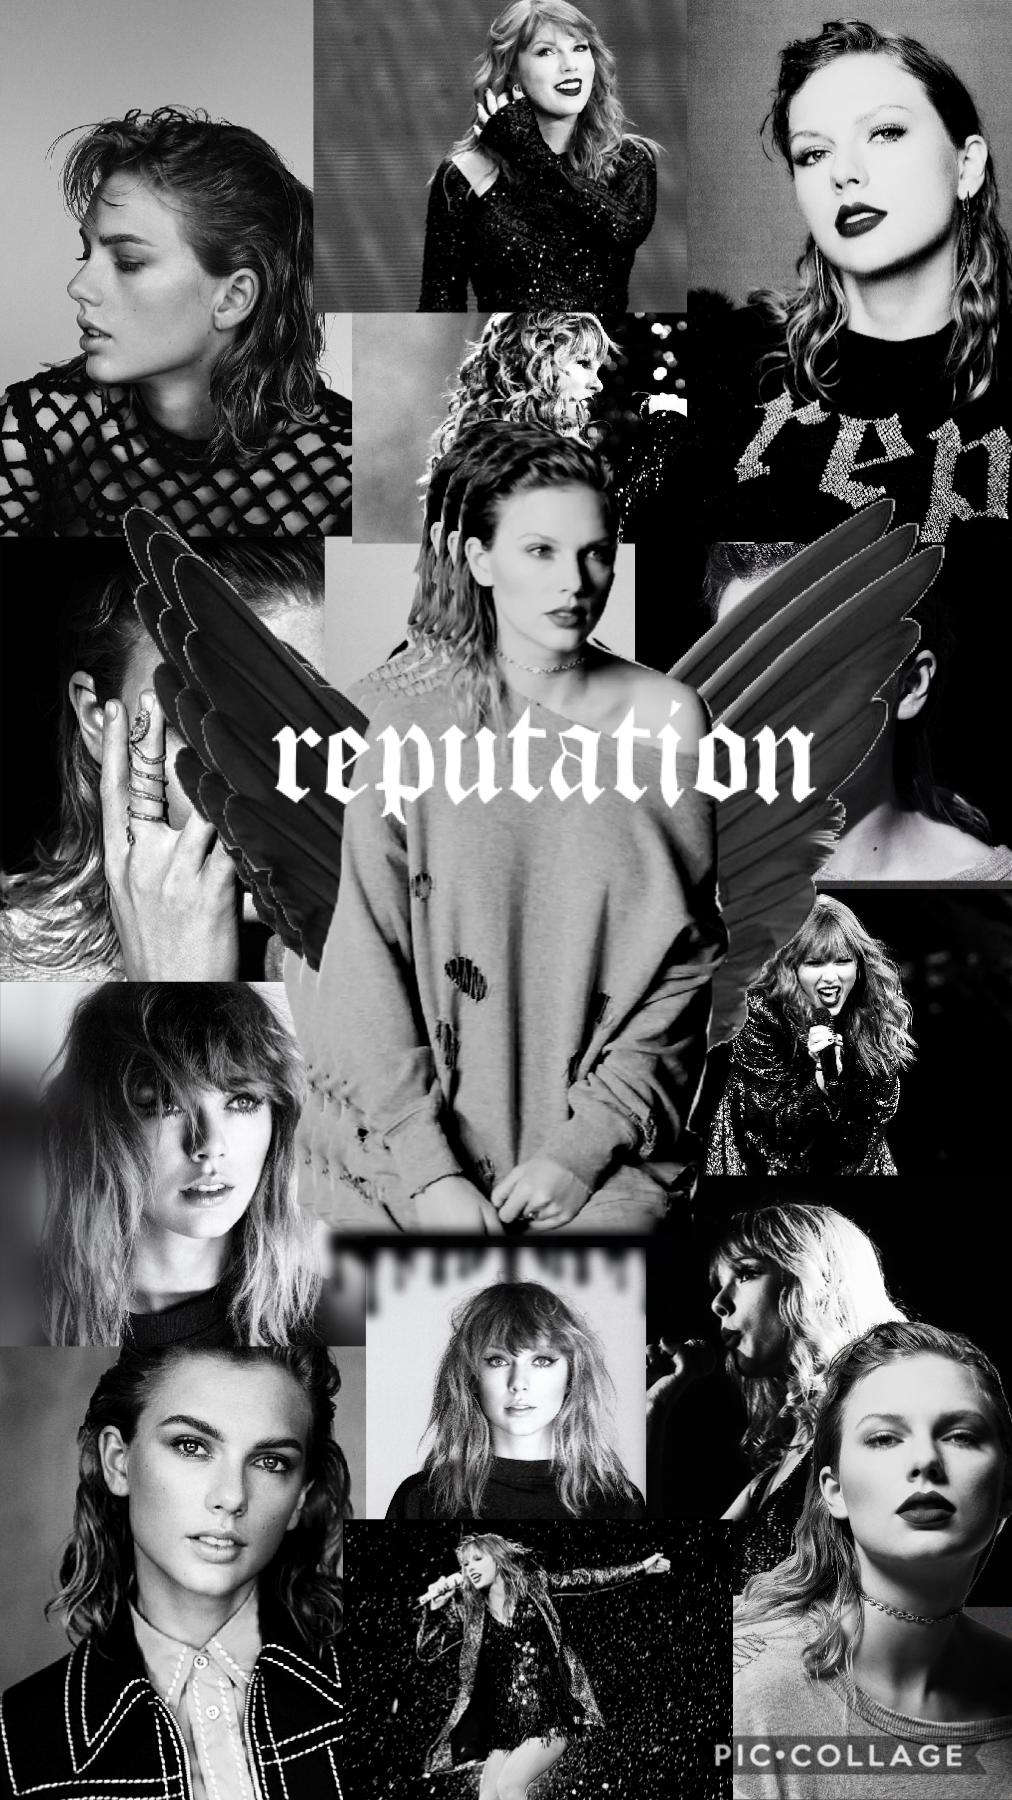 🖤tap🖤
Taylor Swift is a blessing and she deserves the world and nothing less